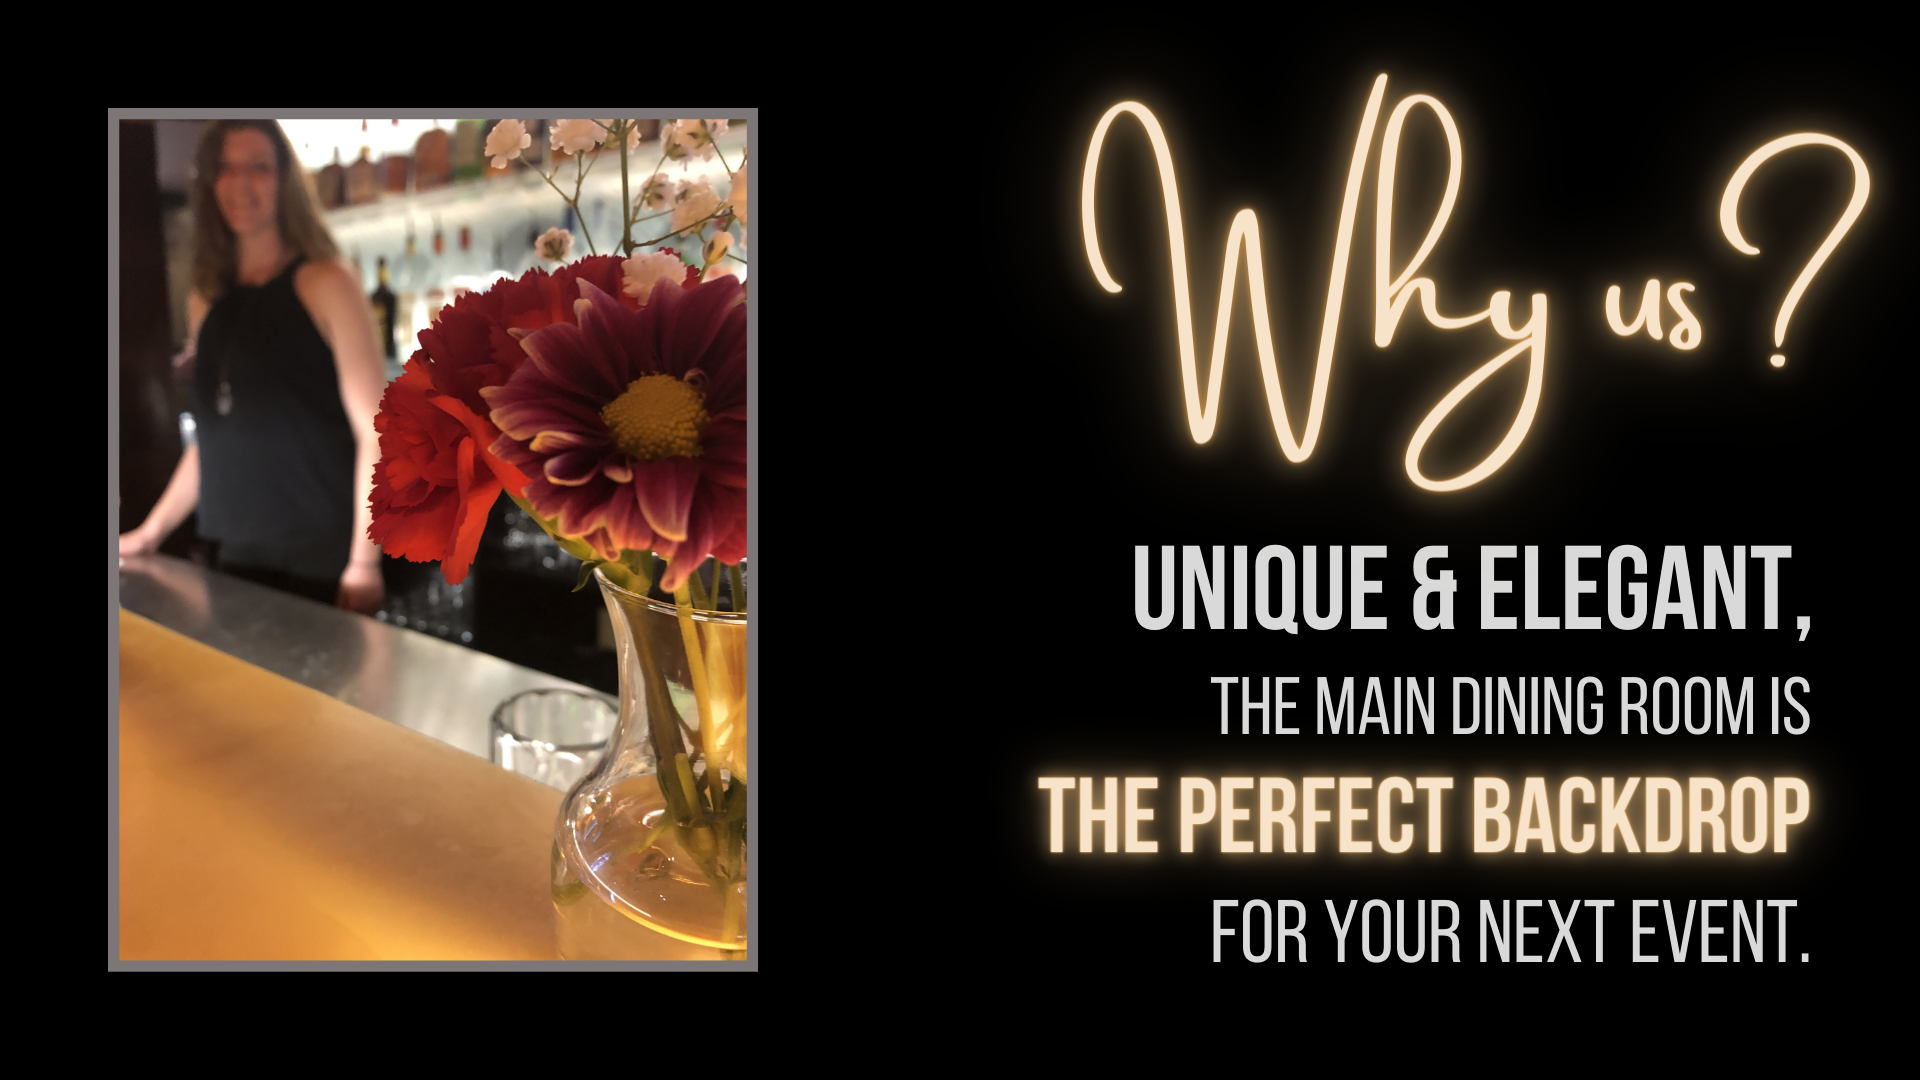 Why us? Unique and elegant. The main dining room is the perfect backdropfor your next event.